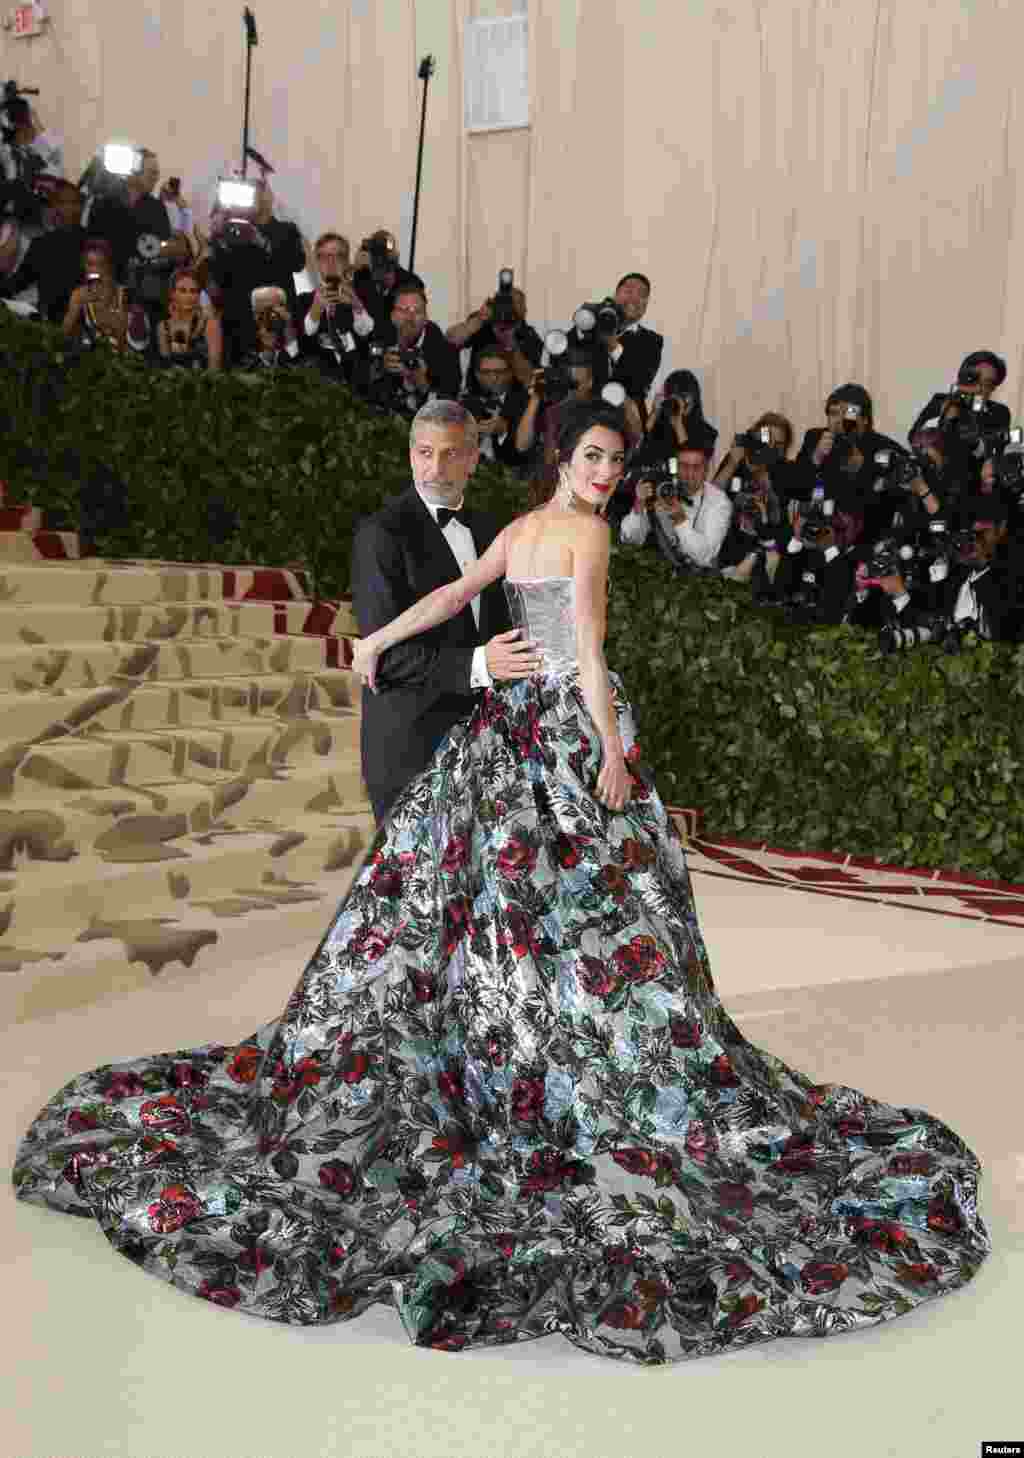 George and Amal Clooney arrive at the Metropolitan Museum of Art Costume Institute Gala (Met Gala) to celebrate the opening of &ldquo;Heavenly Bodies: Fashion and the Catholic Imagination&rdquo; in the Manhattan neighborhood of New York City. (REUTERS/Carlo Allegri)